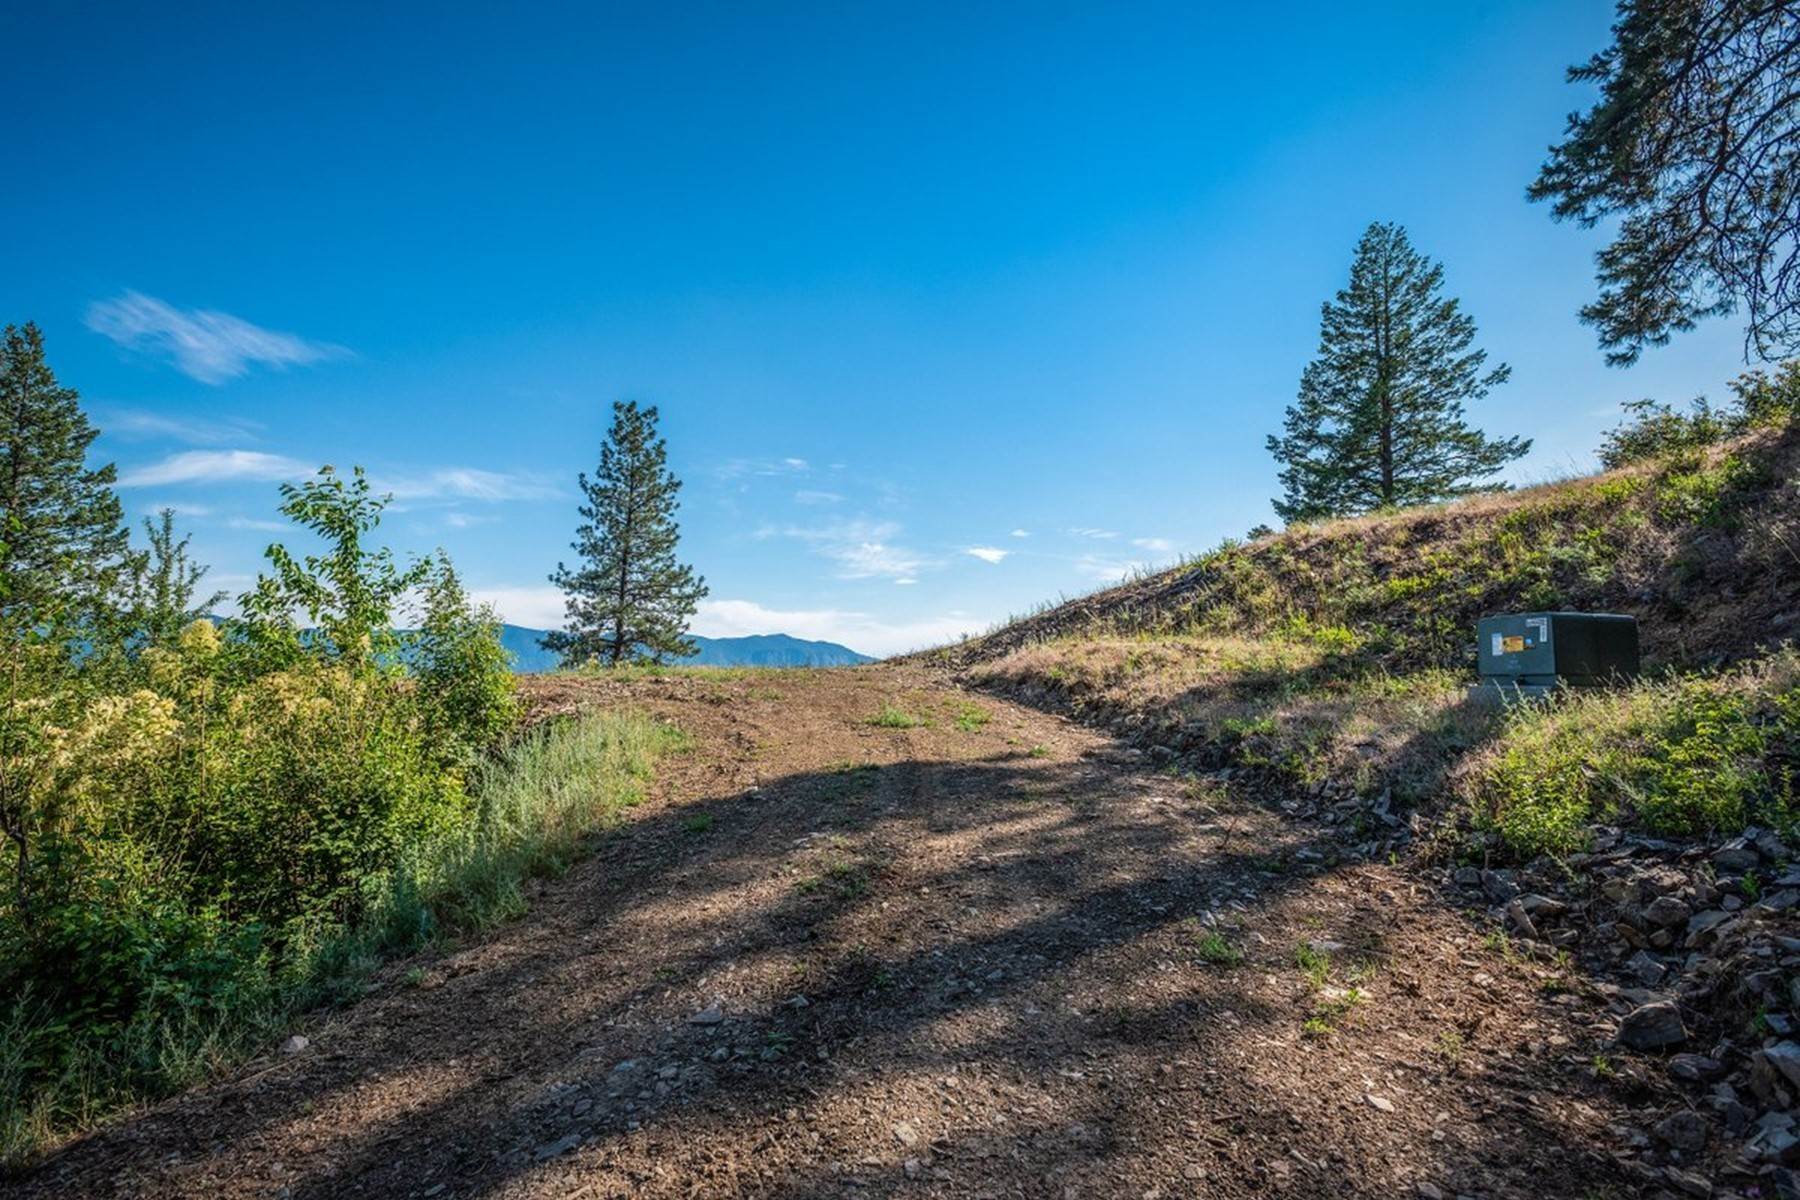 14. Land for Sale at Blk 1 Lot 1 Auxor Rd Blk1 Lot1 Auxor Rd Hope, Idaho 83836 United States